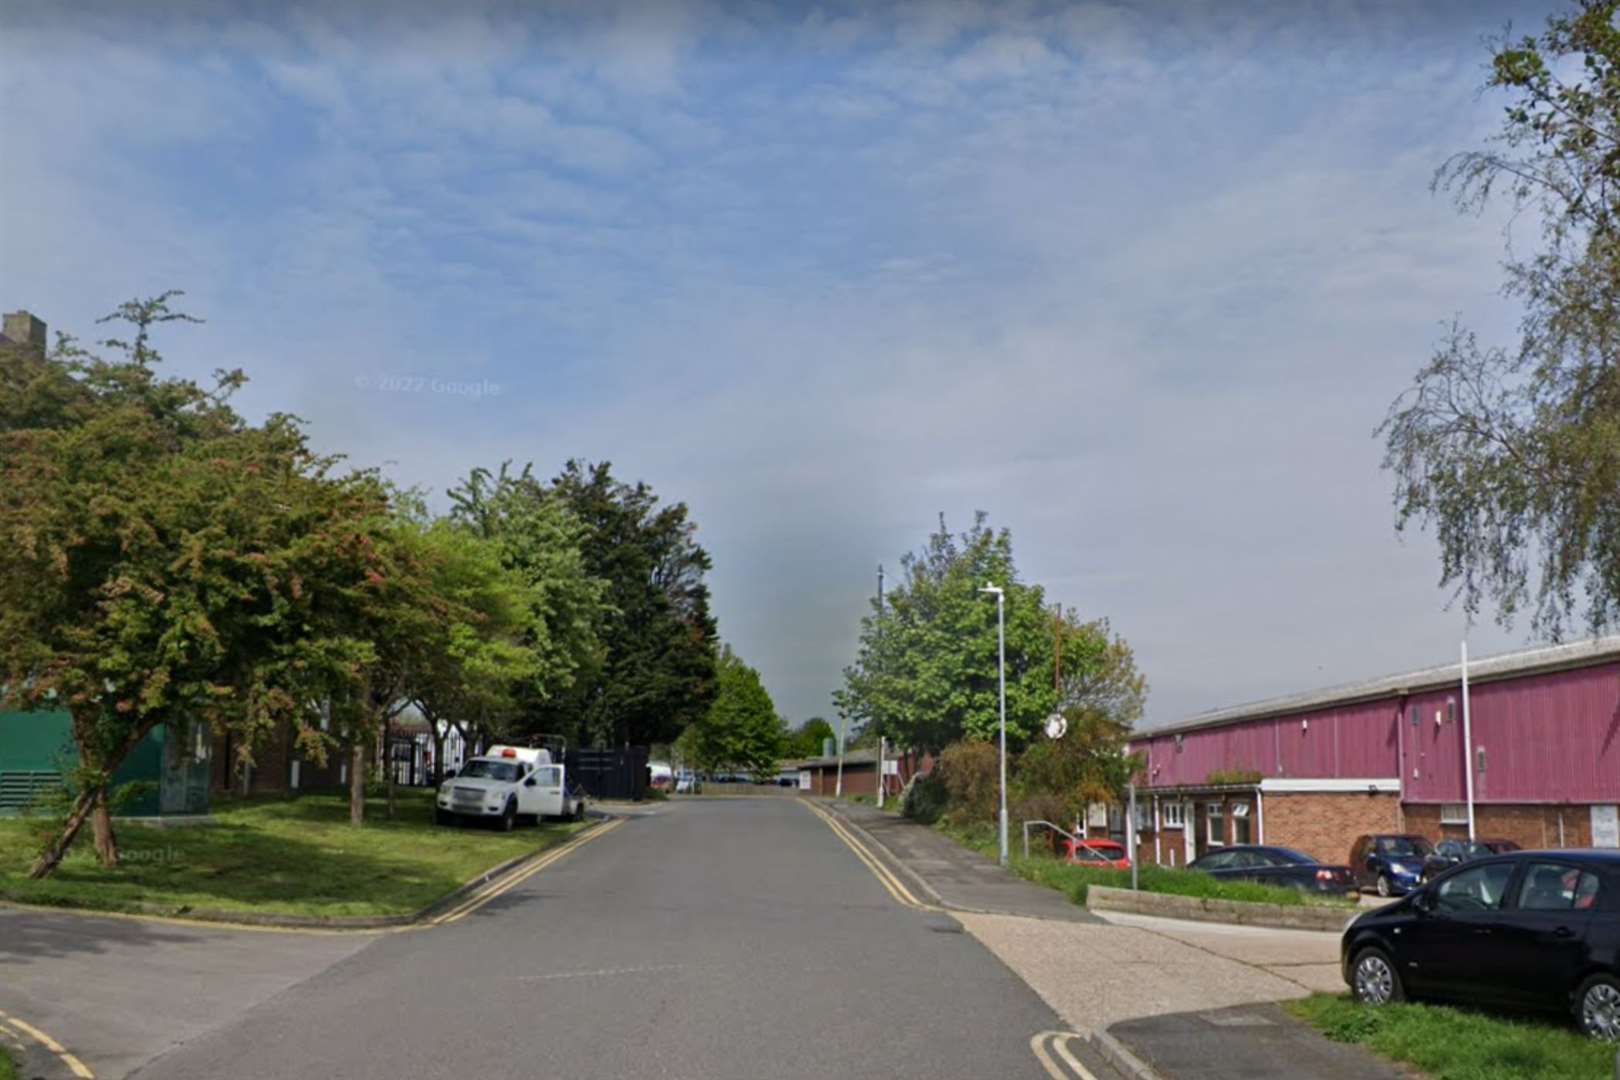 Cannabis plants were found at an industrial unit in Ross Way, Folkestone. Picture: Google